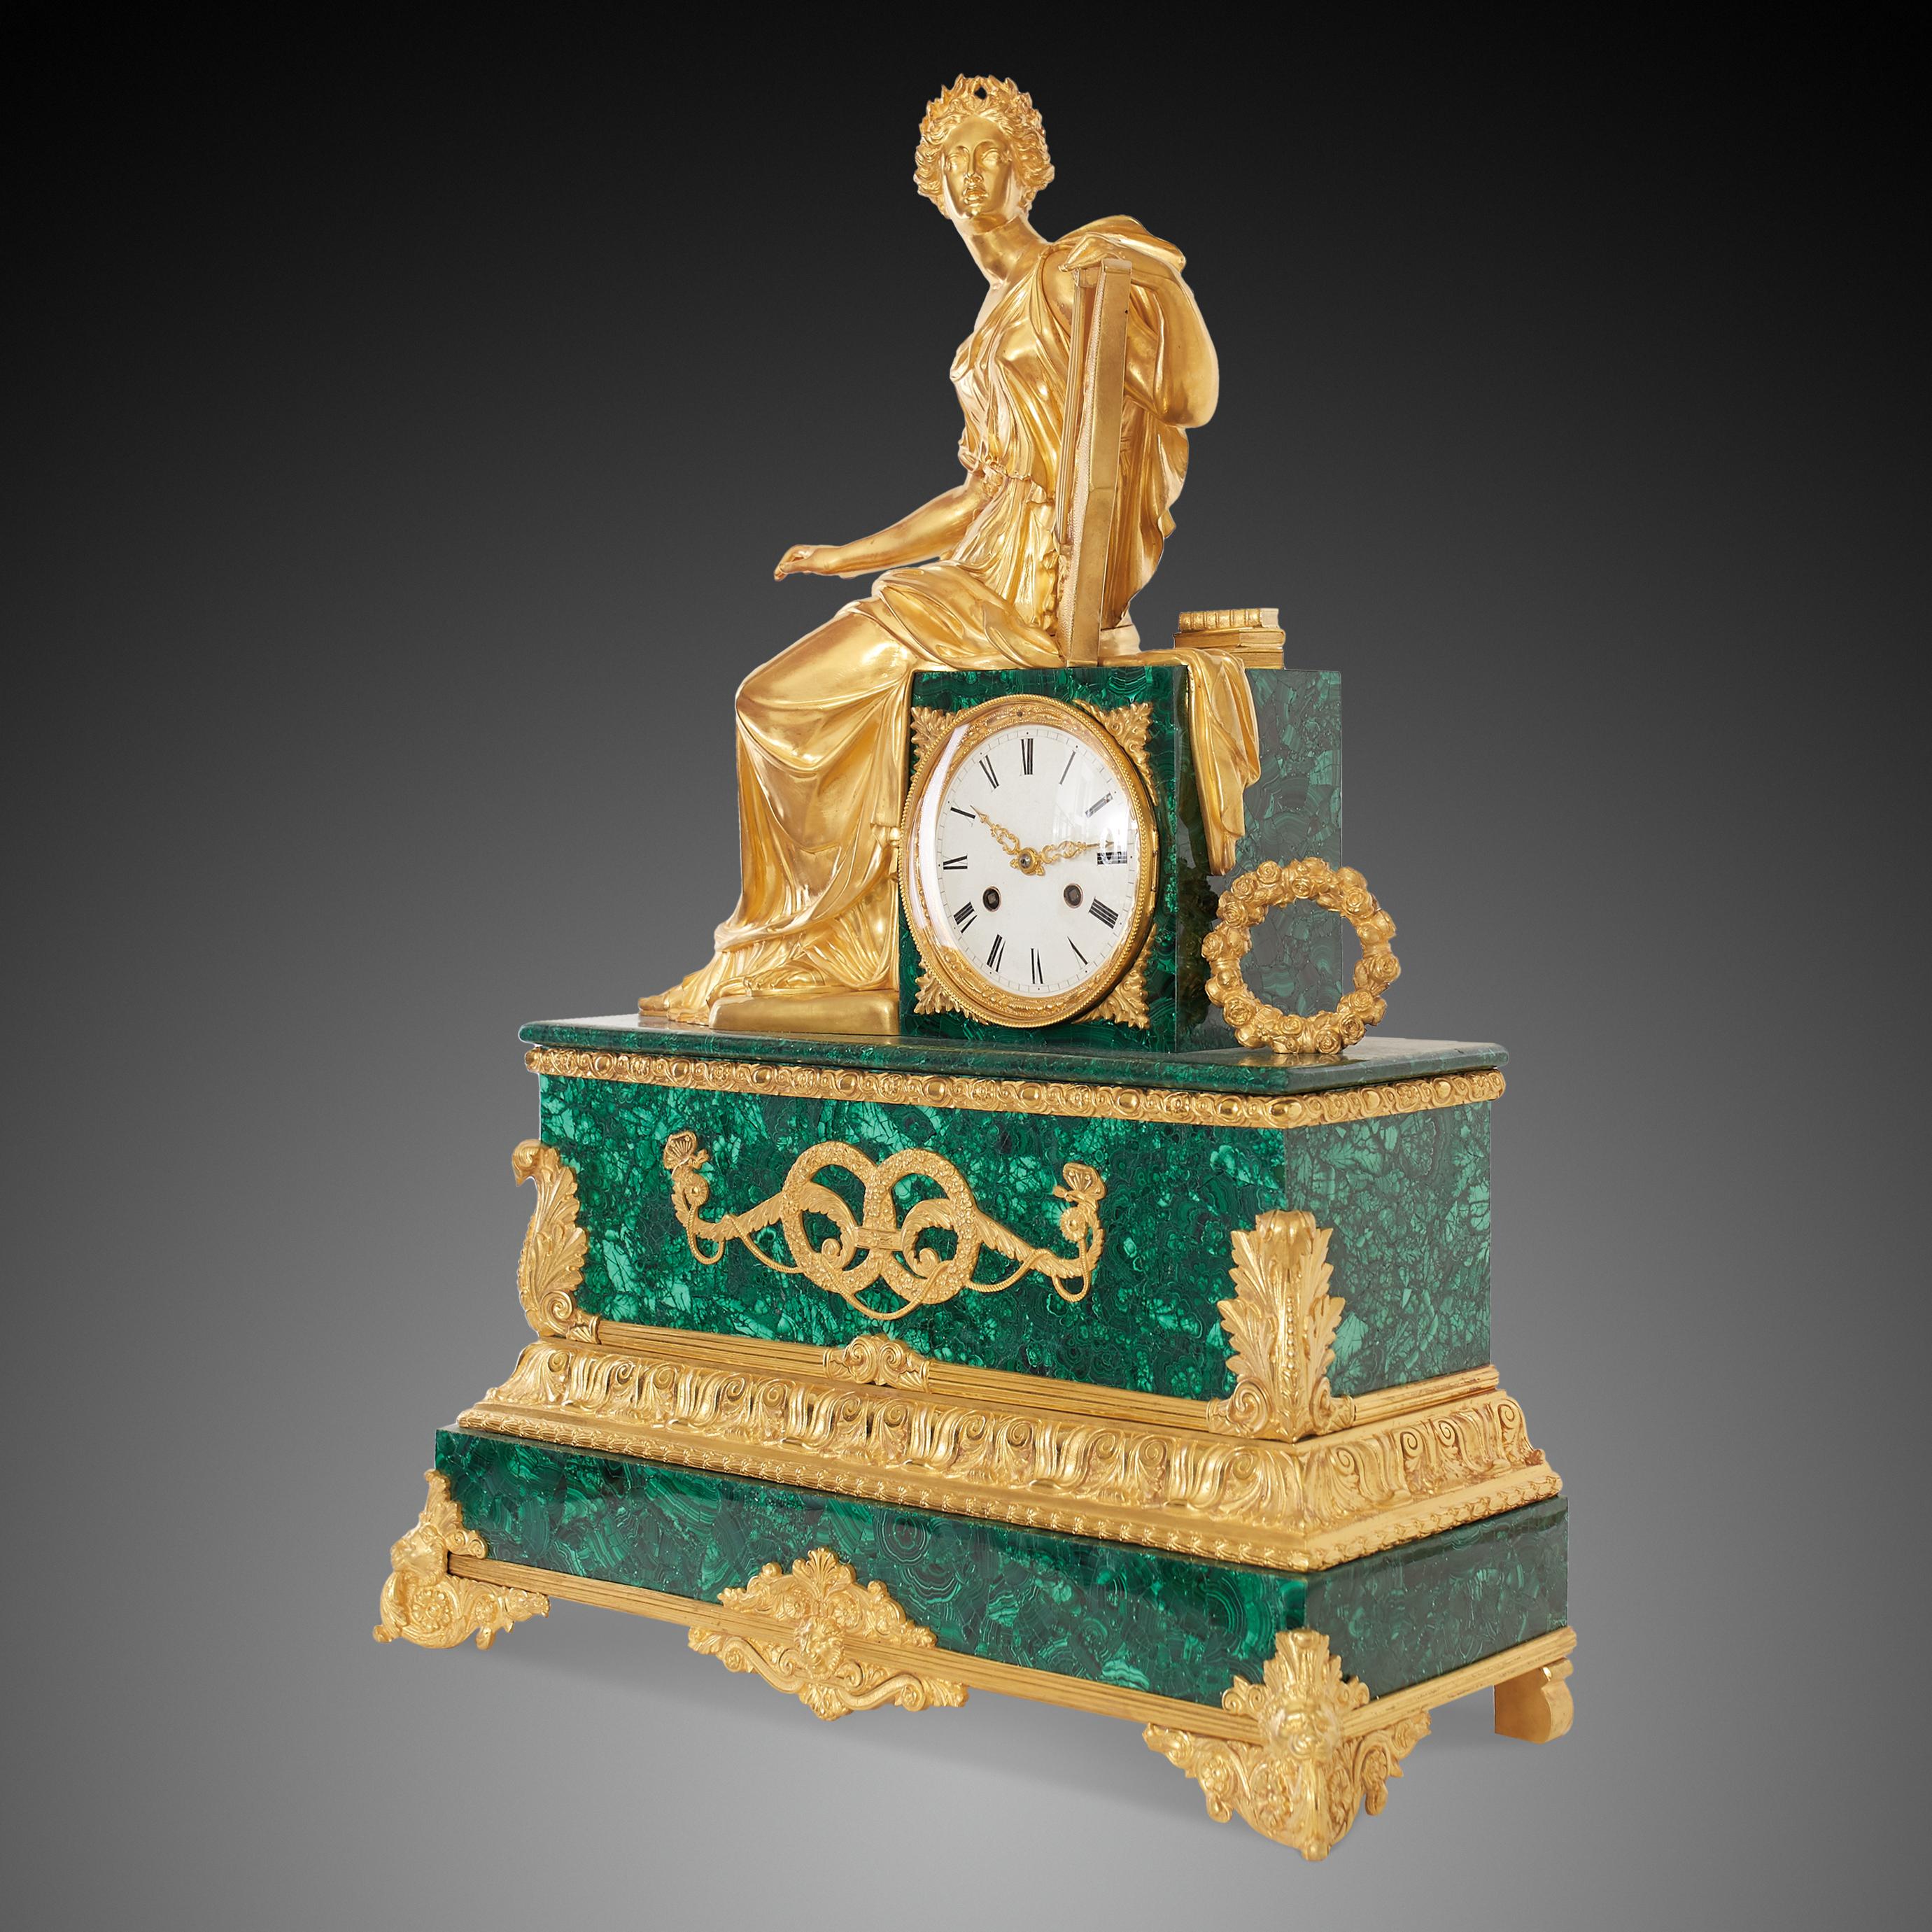 A magnificent malachite and bronze clock. in which Apollo is sitting on the top of it.
Apollo the god of nowledge, oracles, purity, art, music (he directed the choir of the Muses), poetry, archery (but not for war or hunting) and plagues, and also